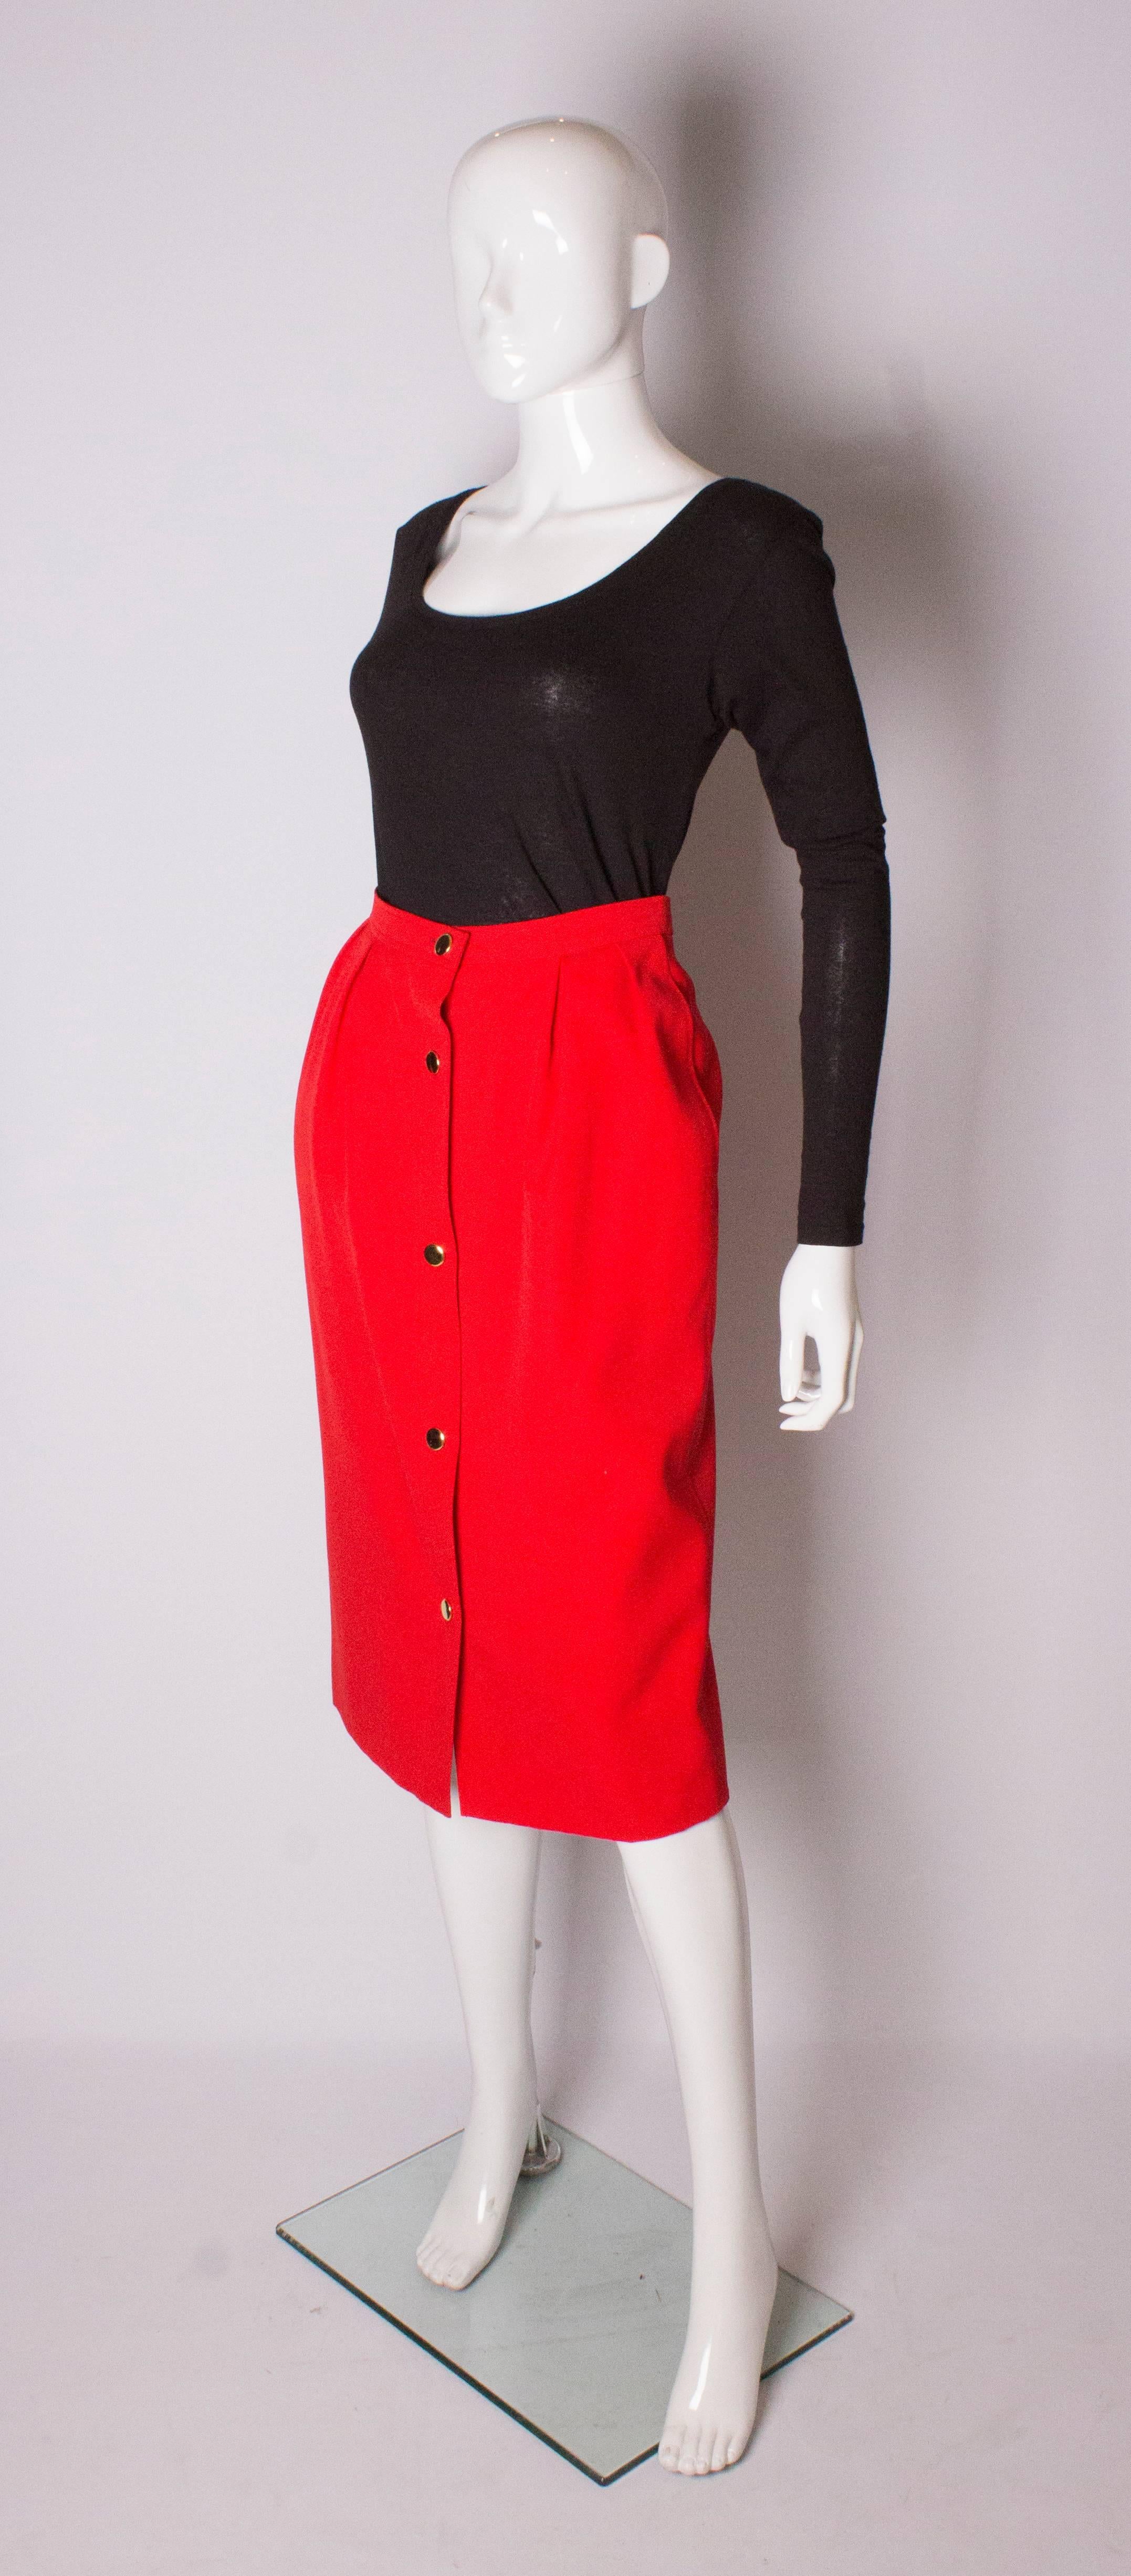 A great vintage  skirt by Yves Saint Laurent , Tricot line. The skirt is made of wool, and is fully lined. It has a pocket on either side, gathering at the front ,and a 5 button front opening.